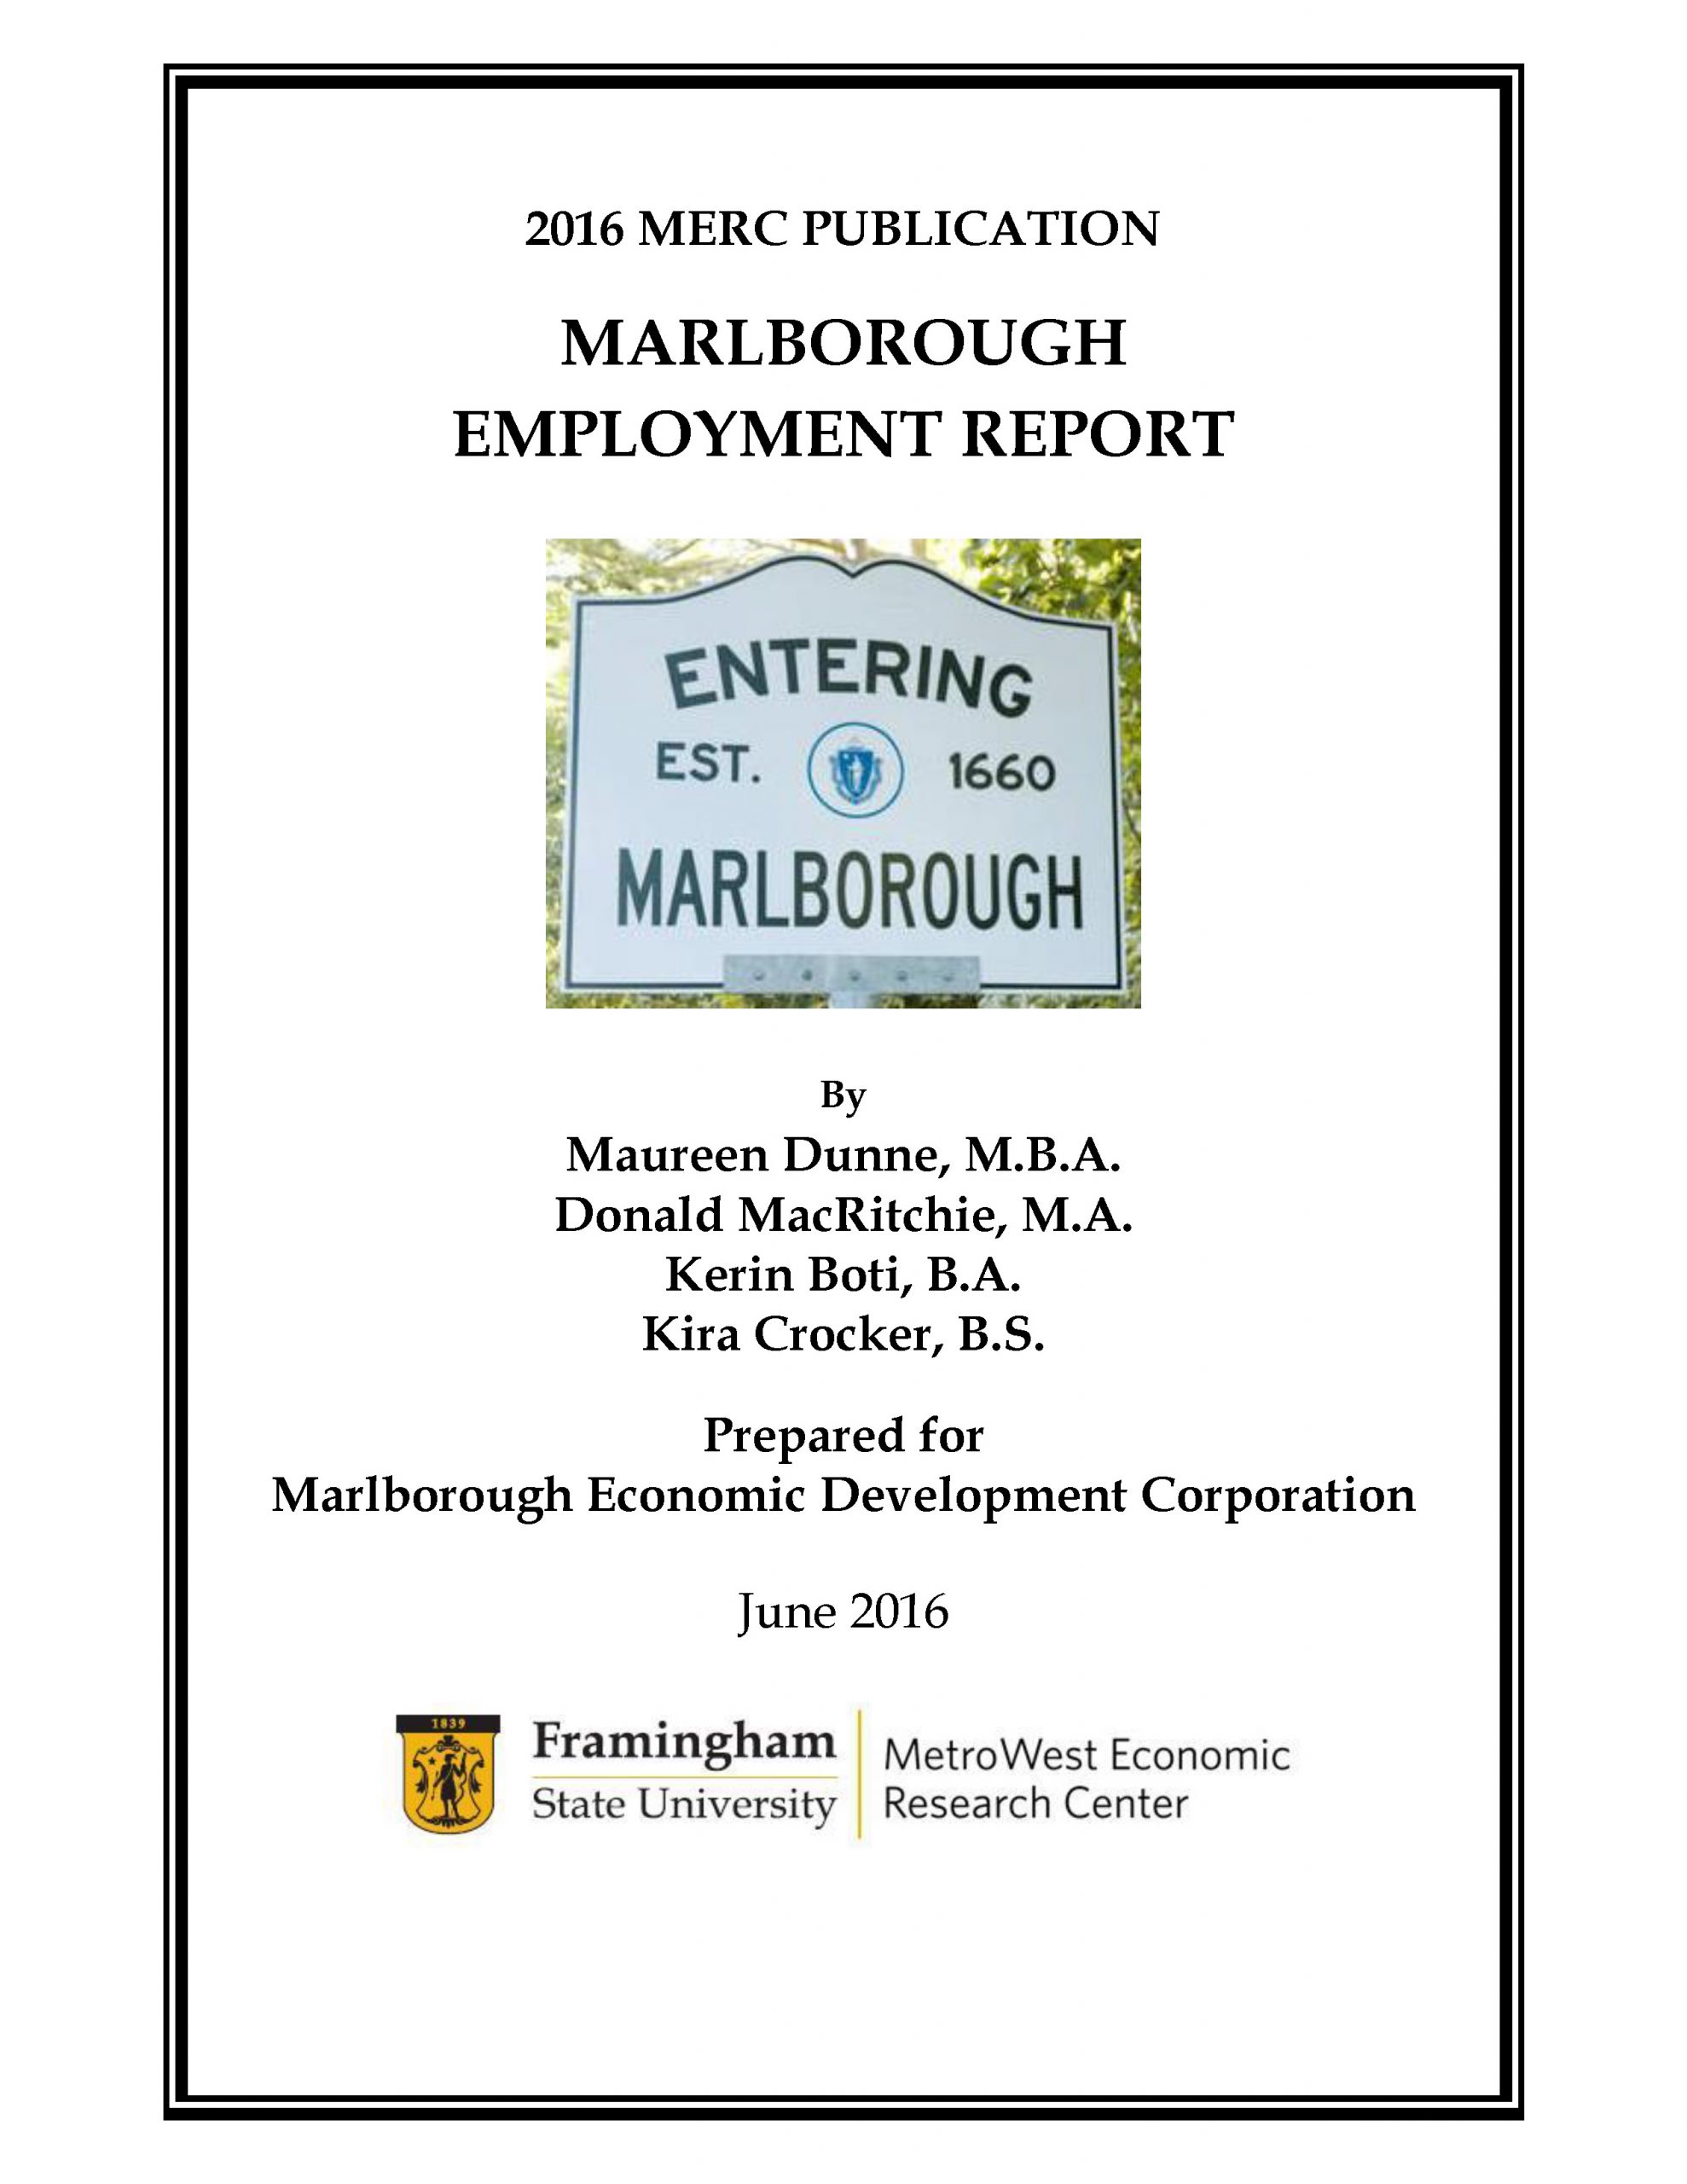 MERC Special Report: I-495/95 South Regional Technology Economic Target Area Economic Characteristics 2004 cover page